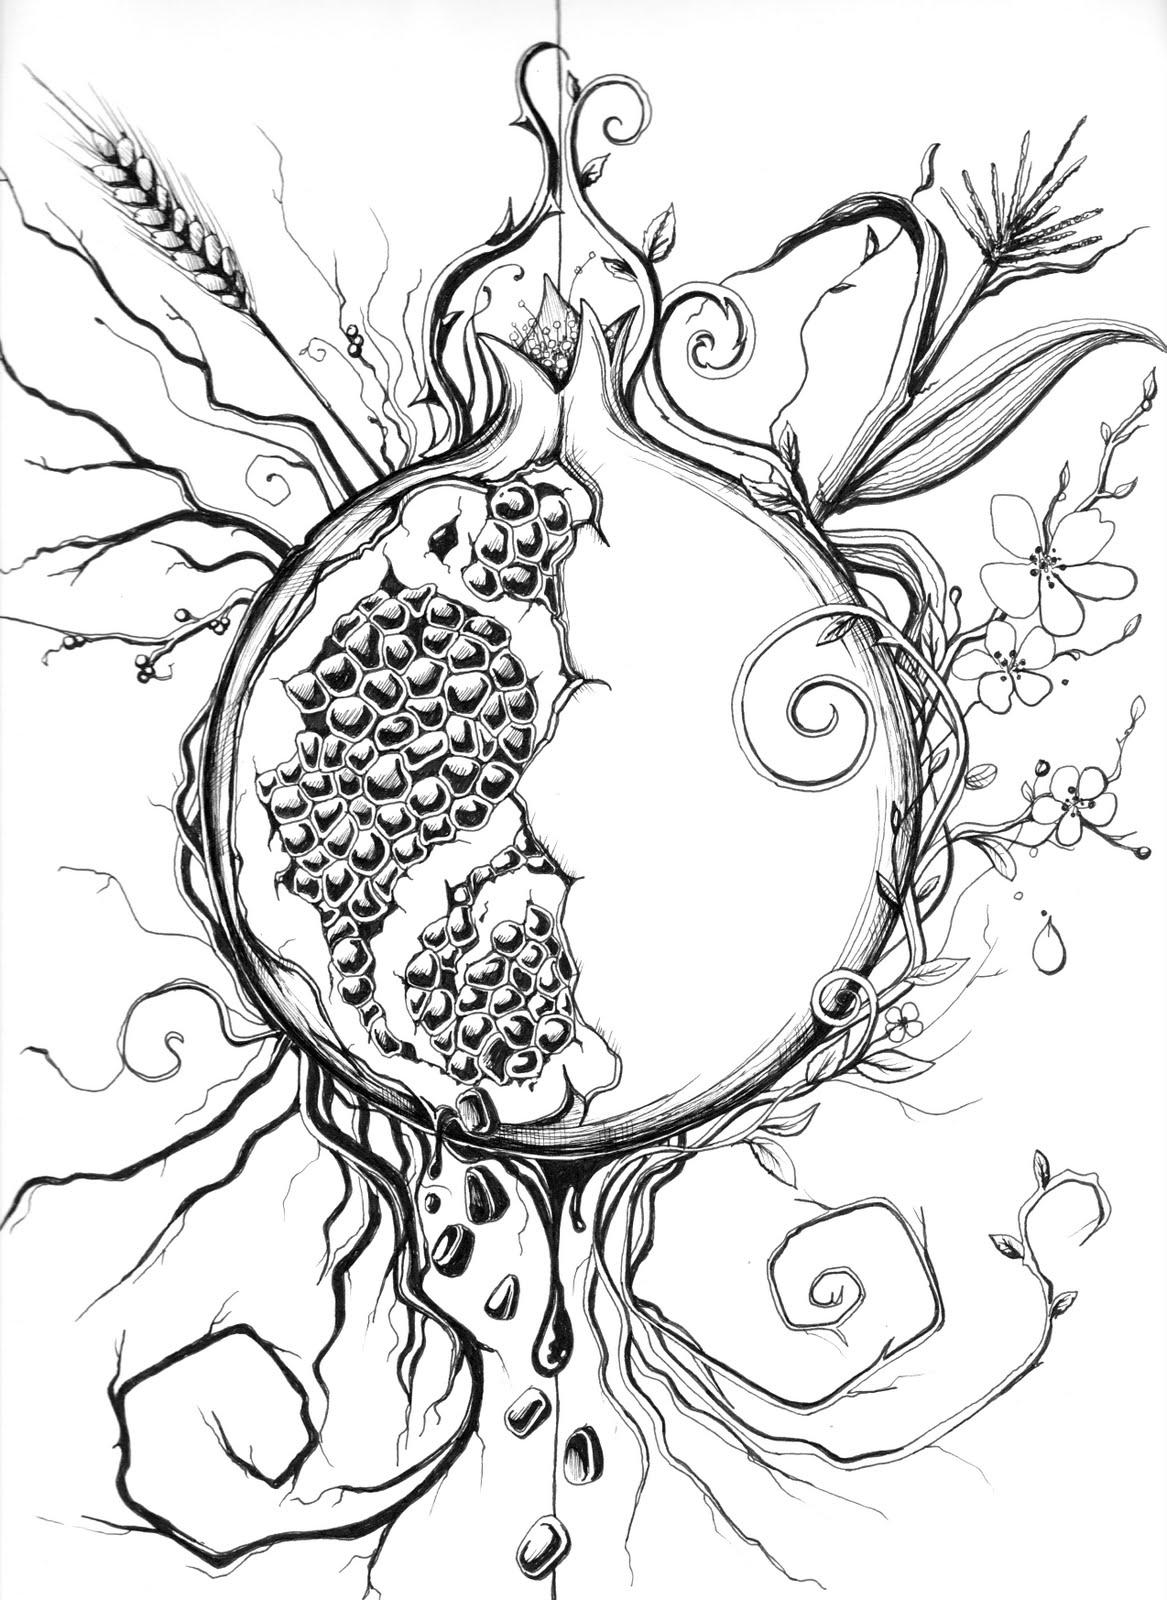 Pomegranate coloring pages! – honor the gods